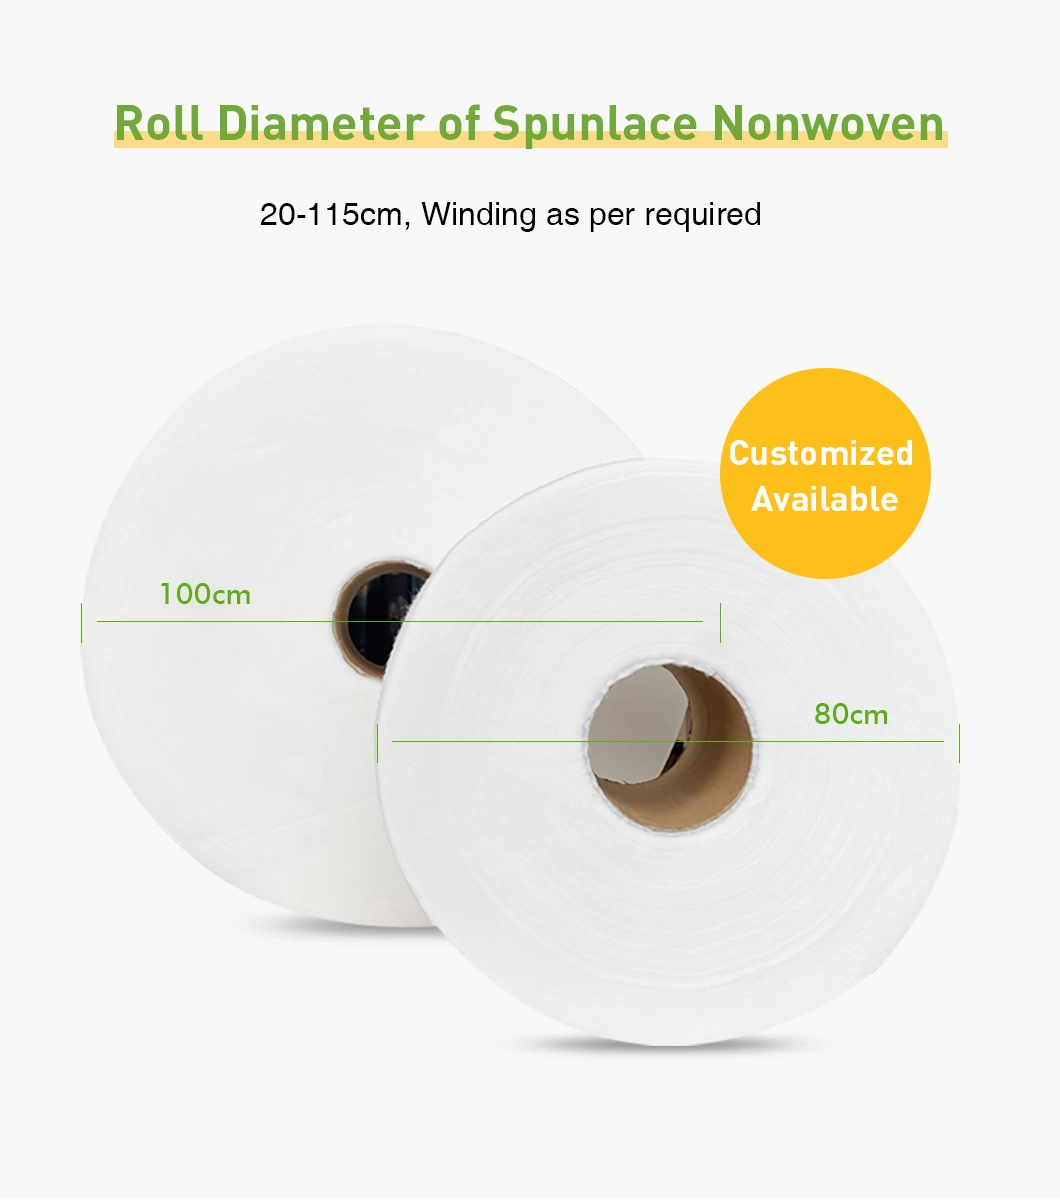 100% Viscose Spunlace Nonwoven Fabric for Face Towels